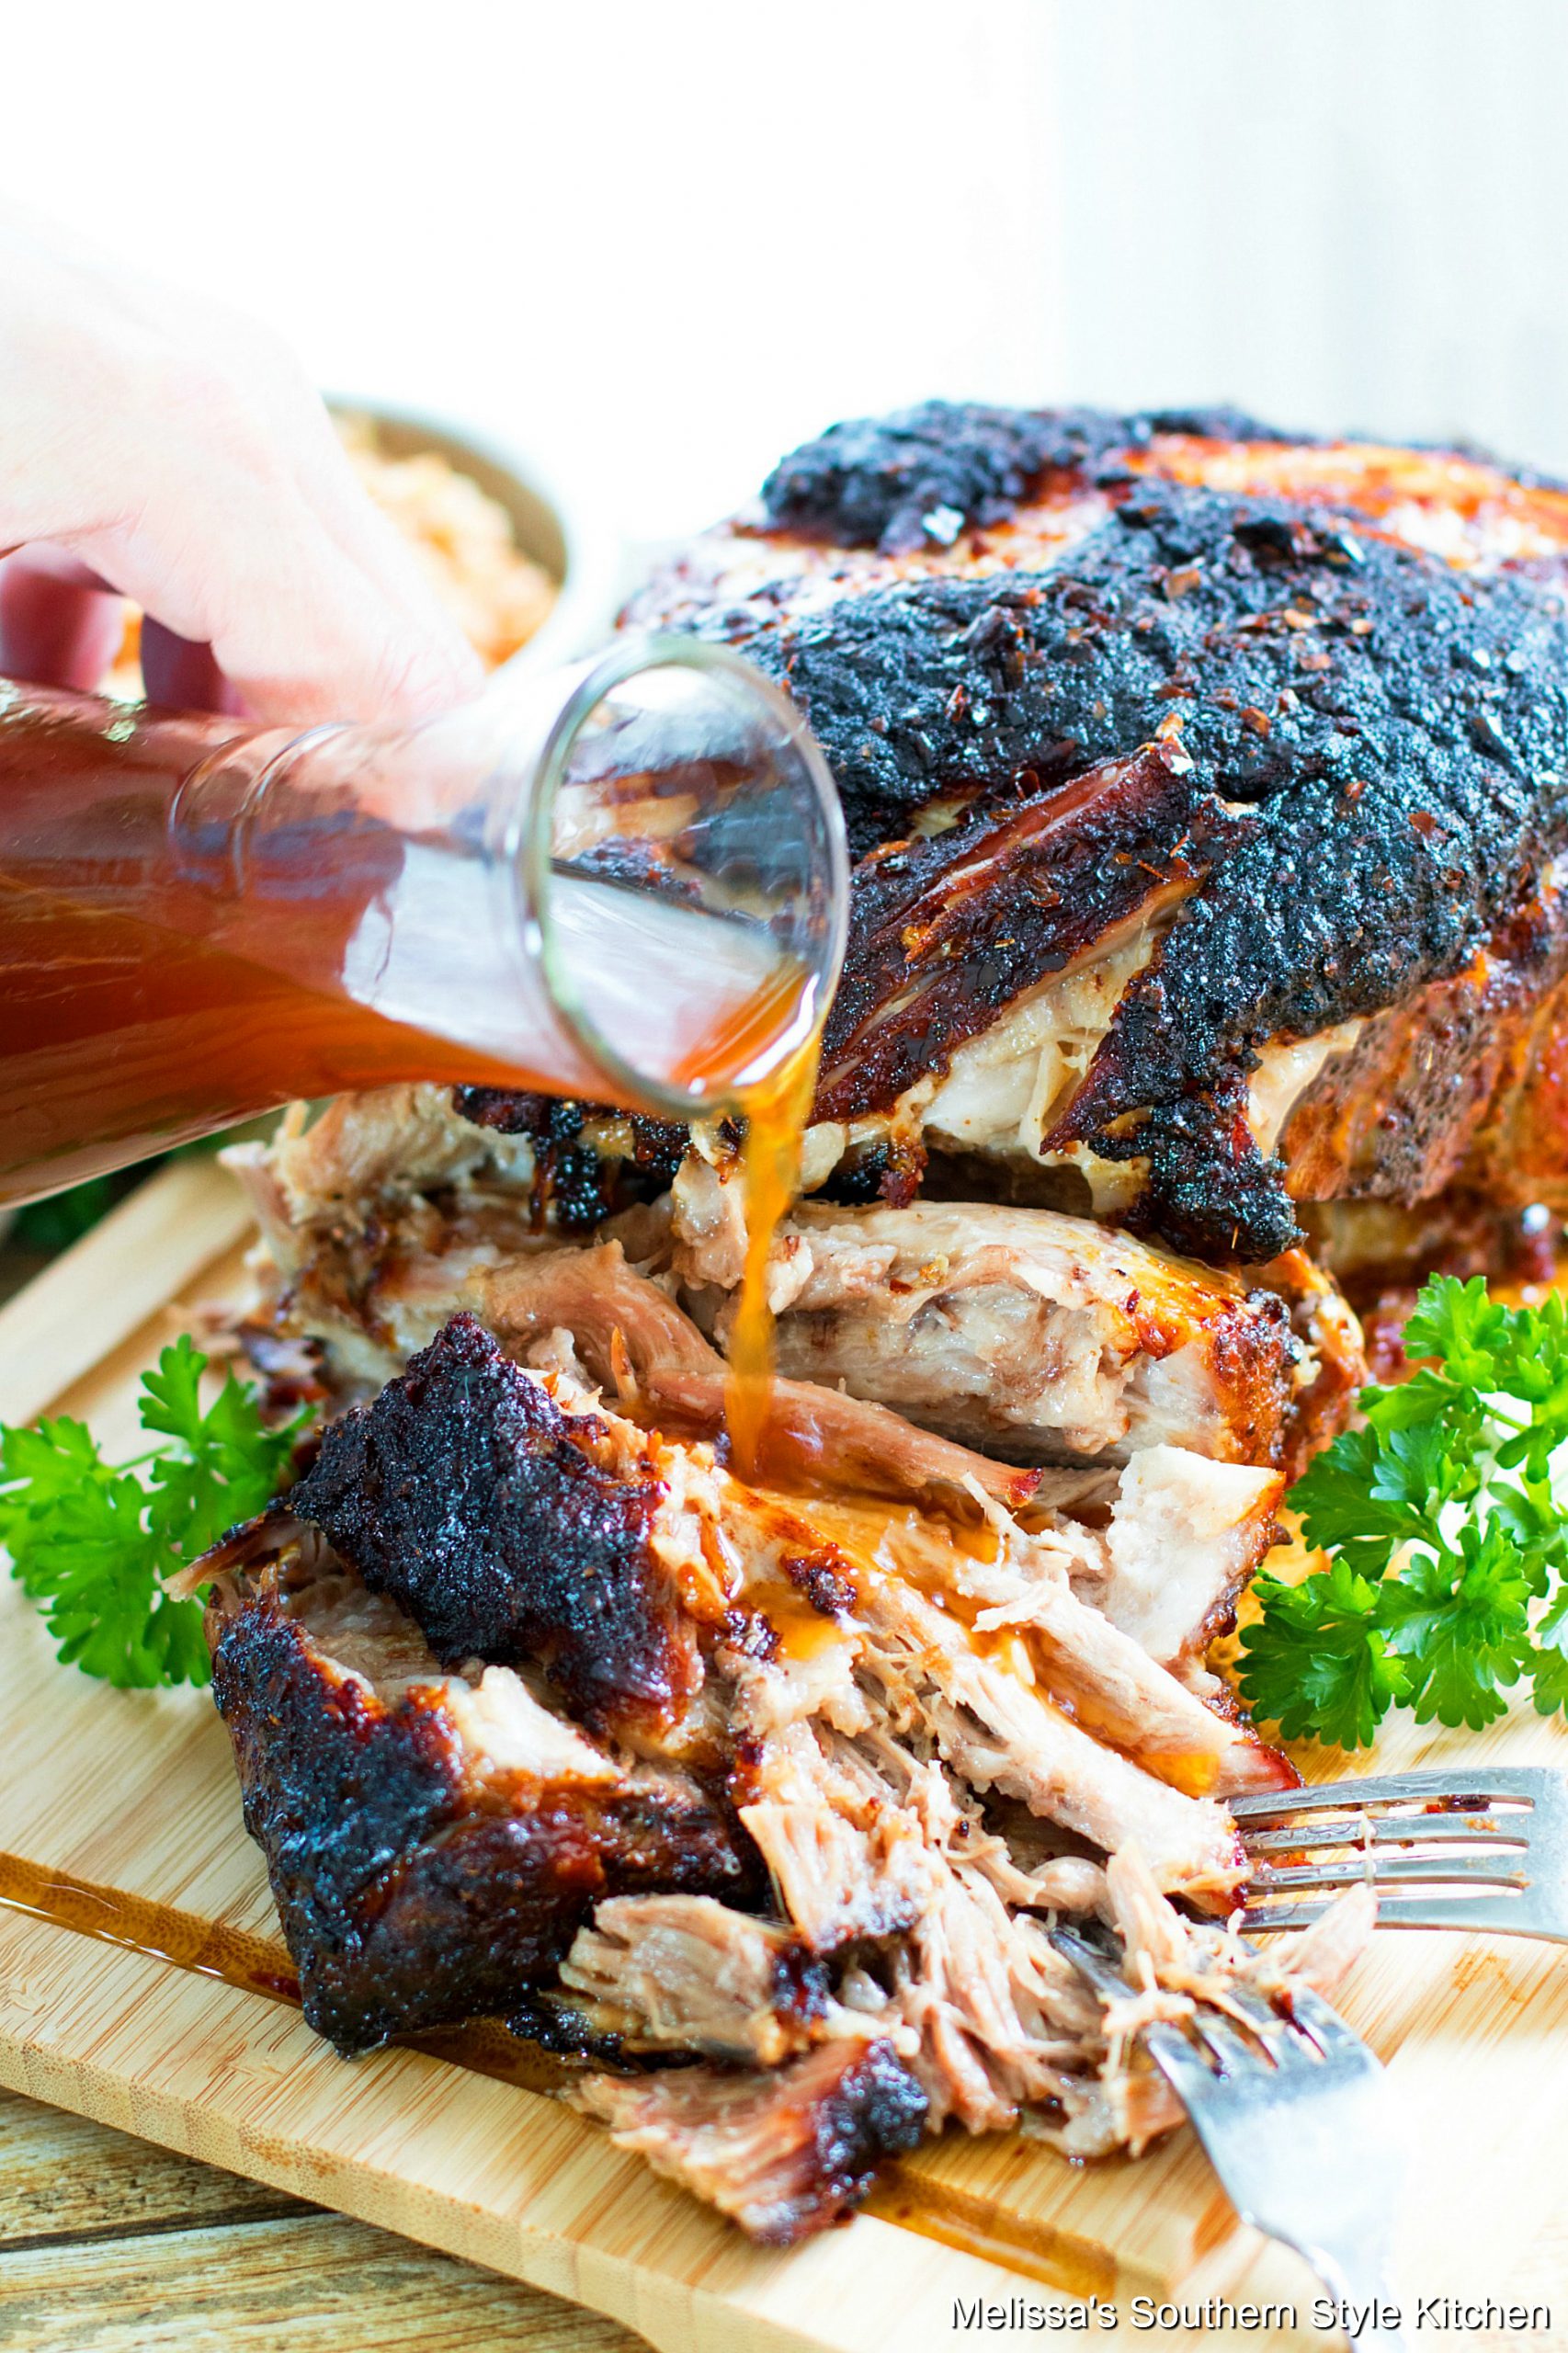 Pulled Pork Barbecue Recipe with vinegar sauce 